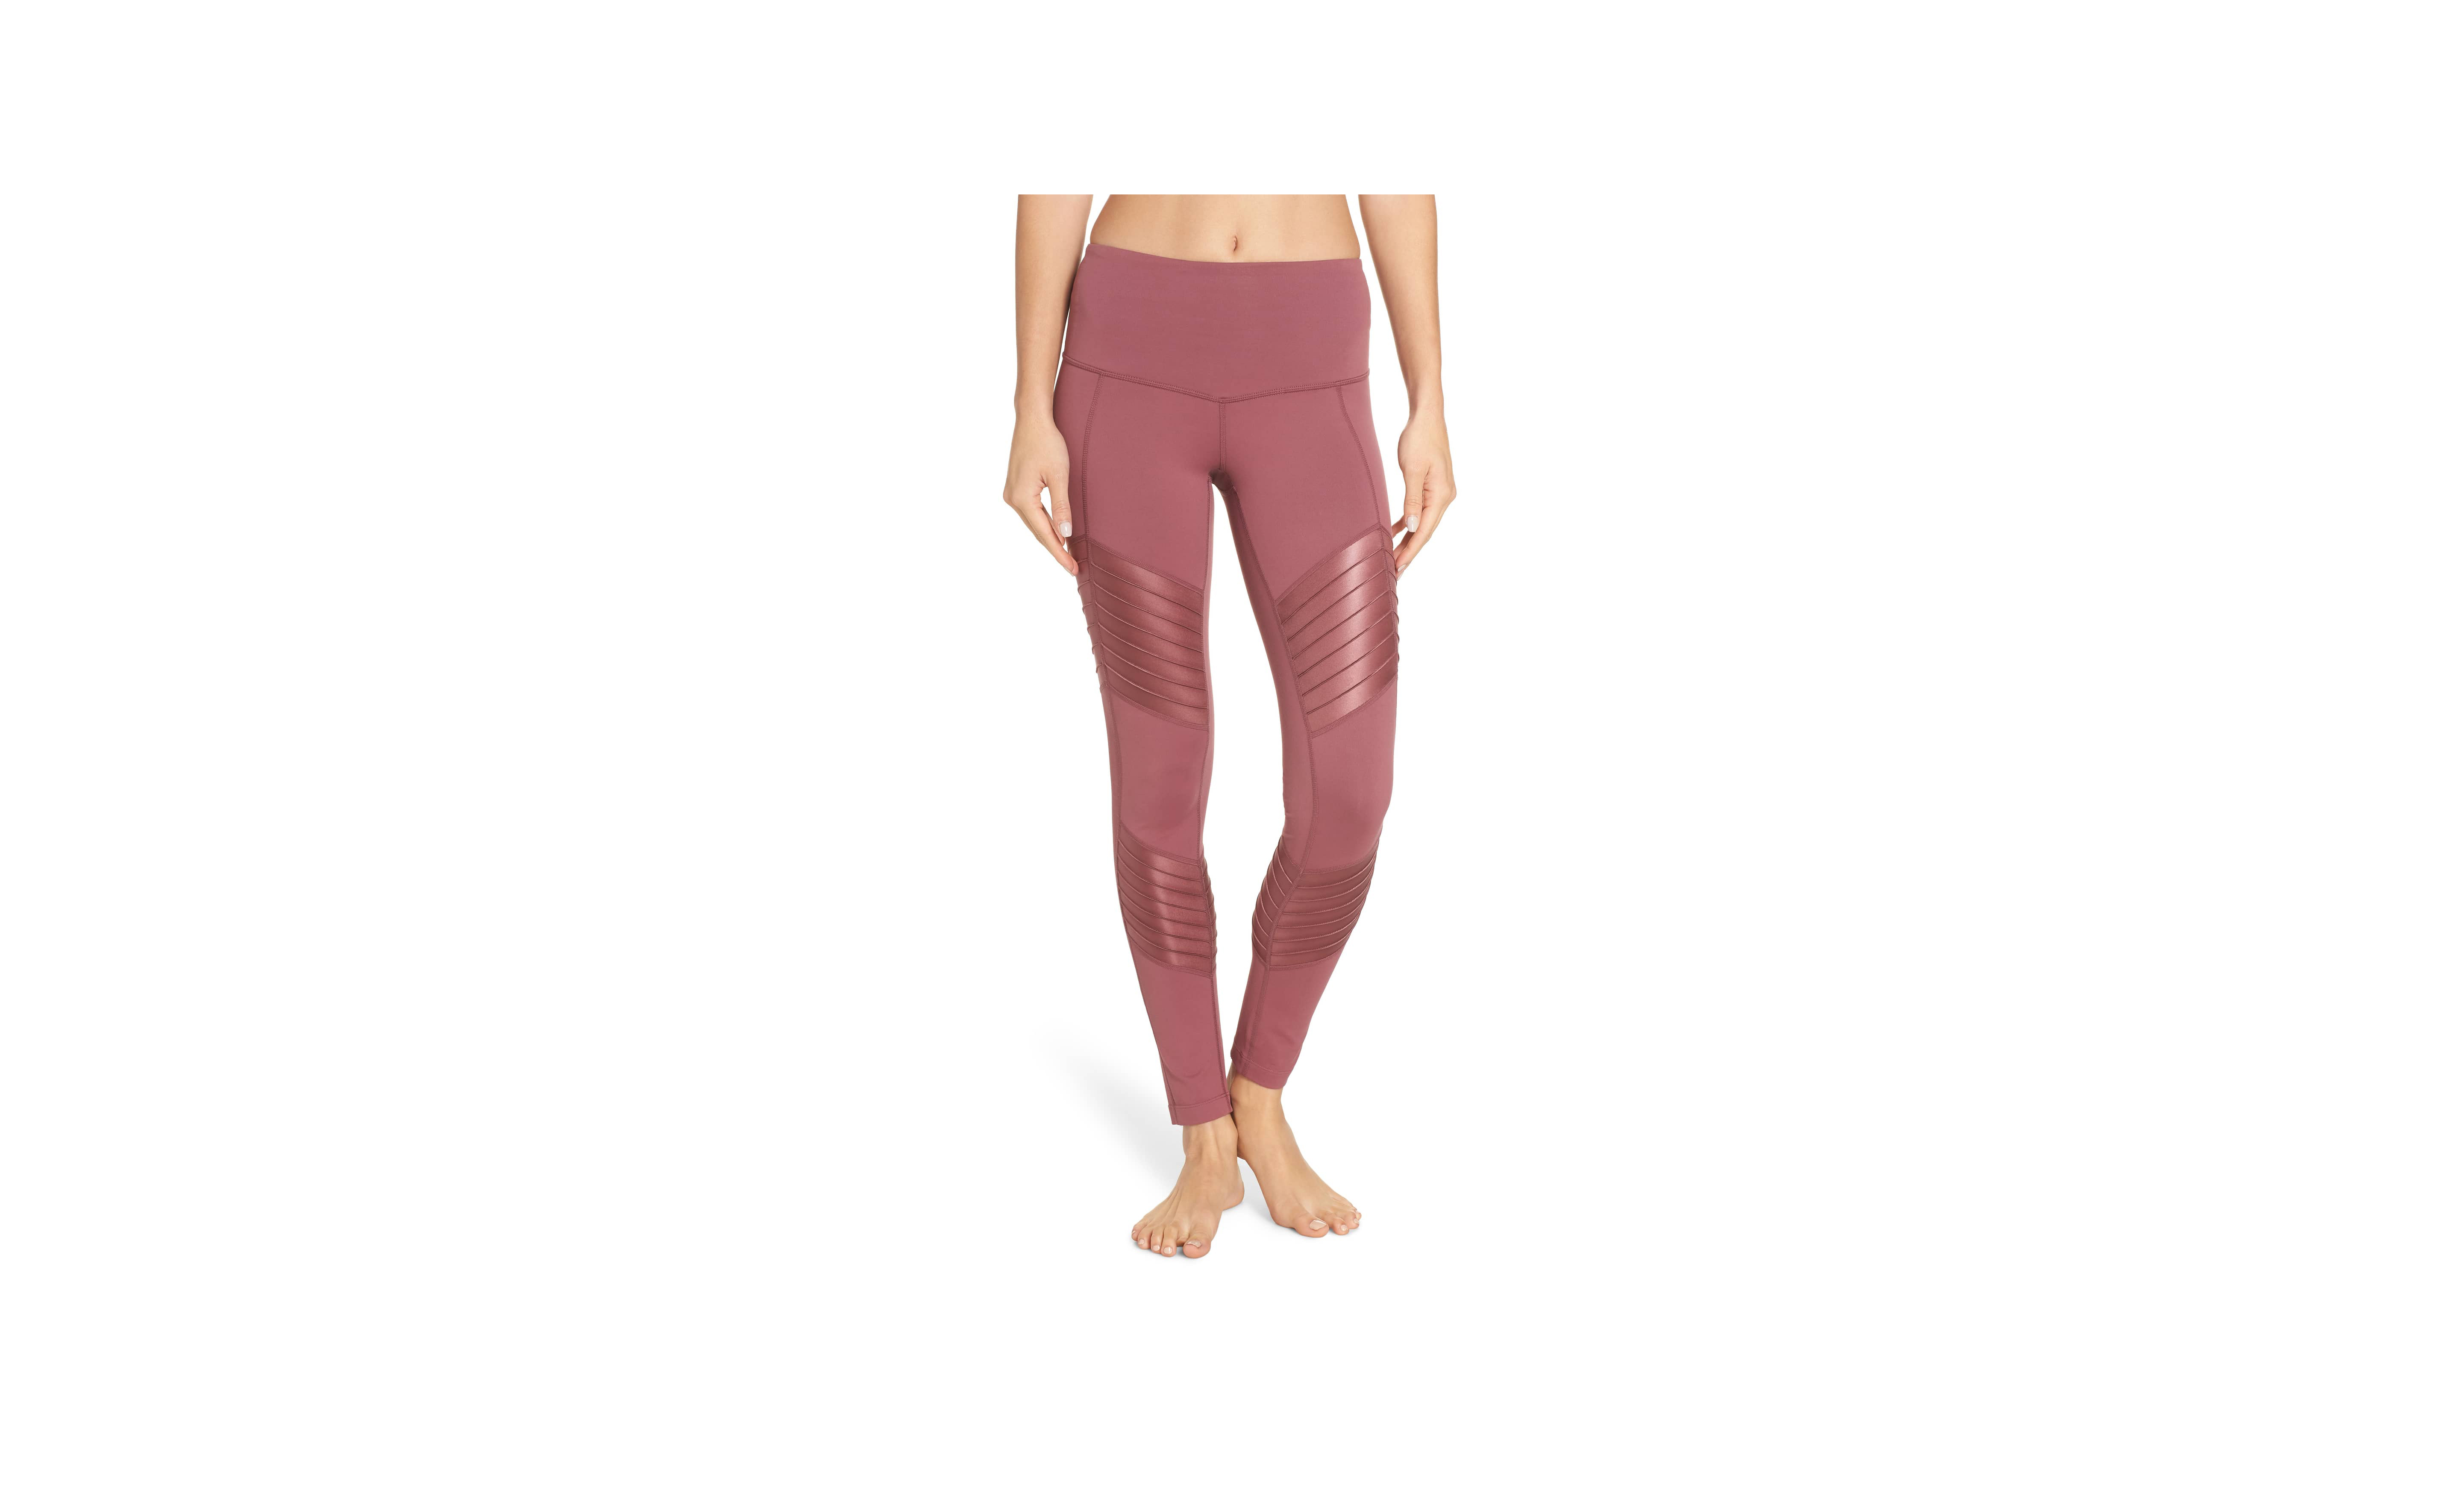 Alo Yoga - Spotted: Our Moto Legging in this week's issue